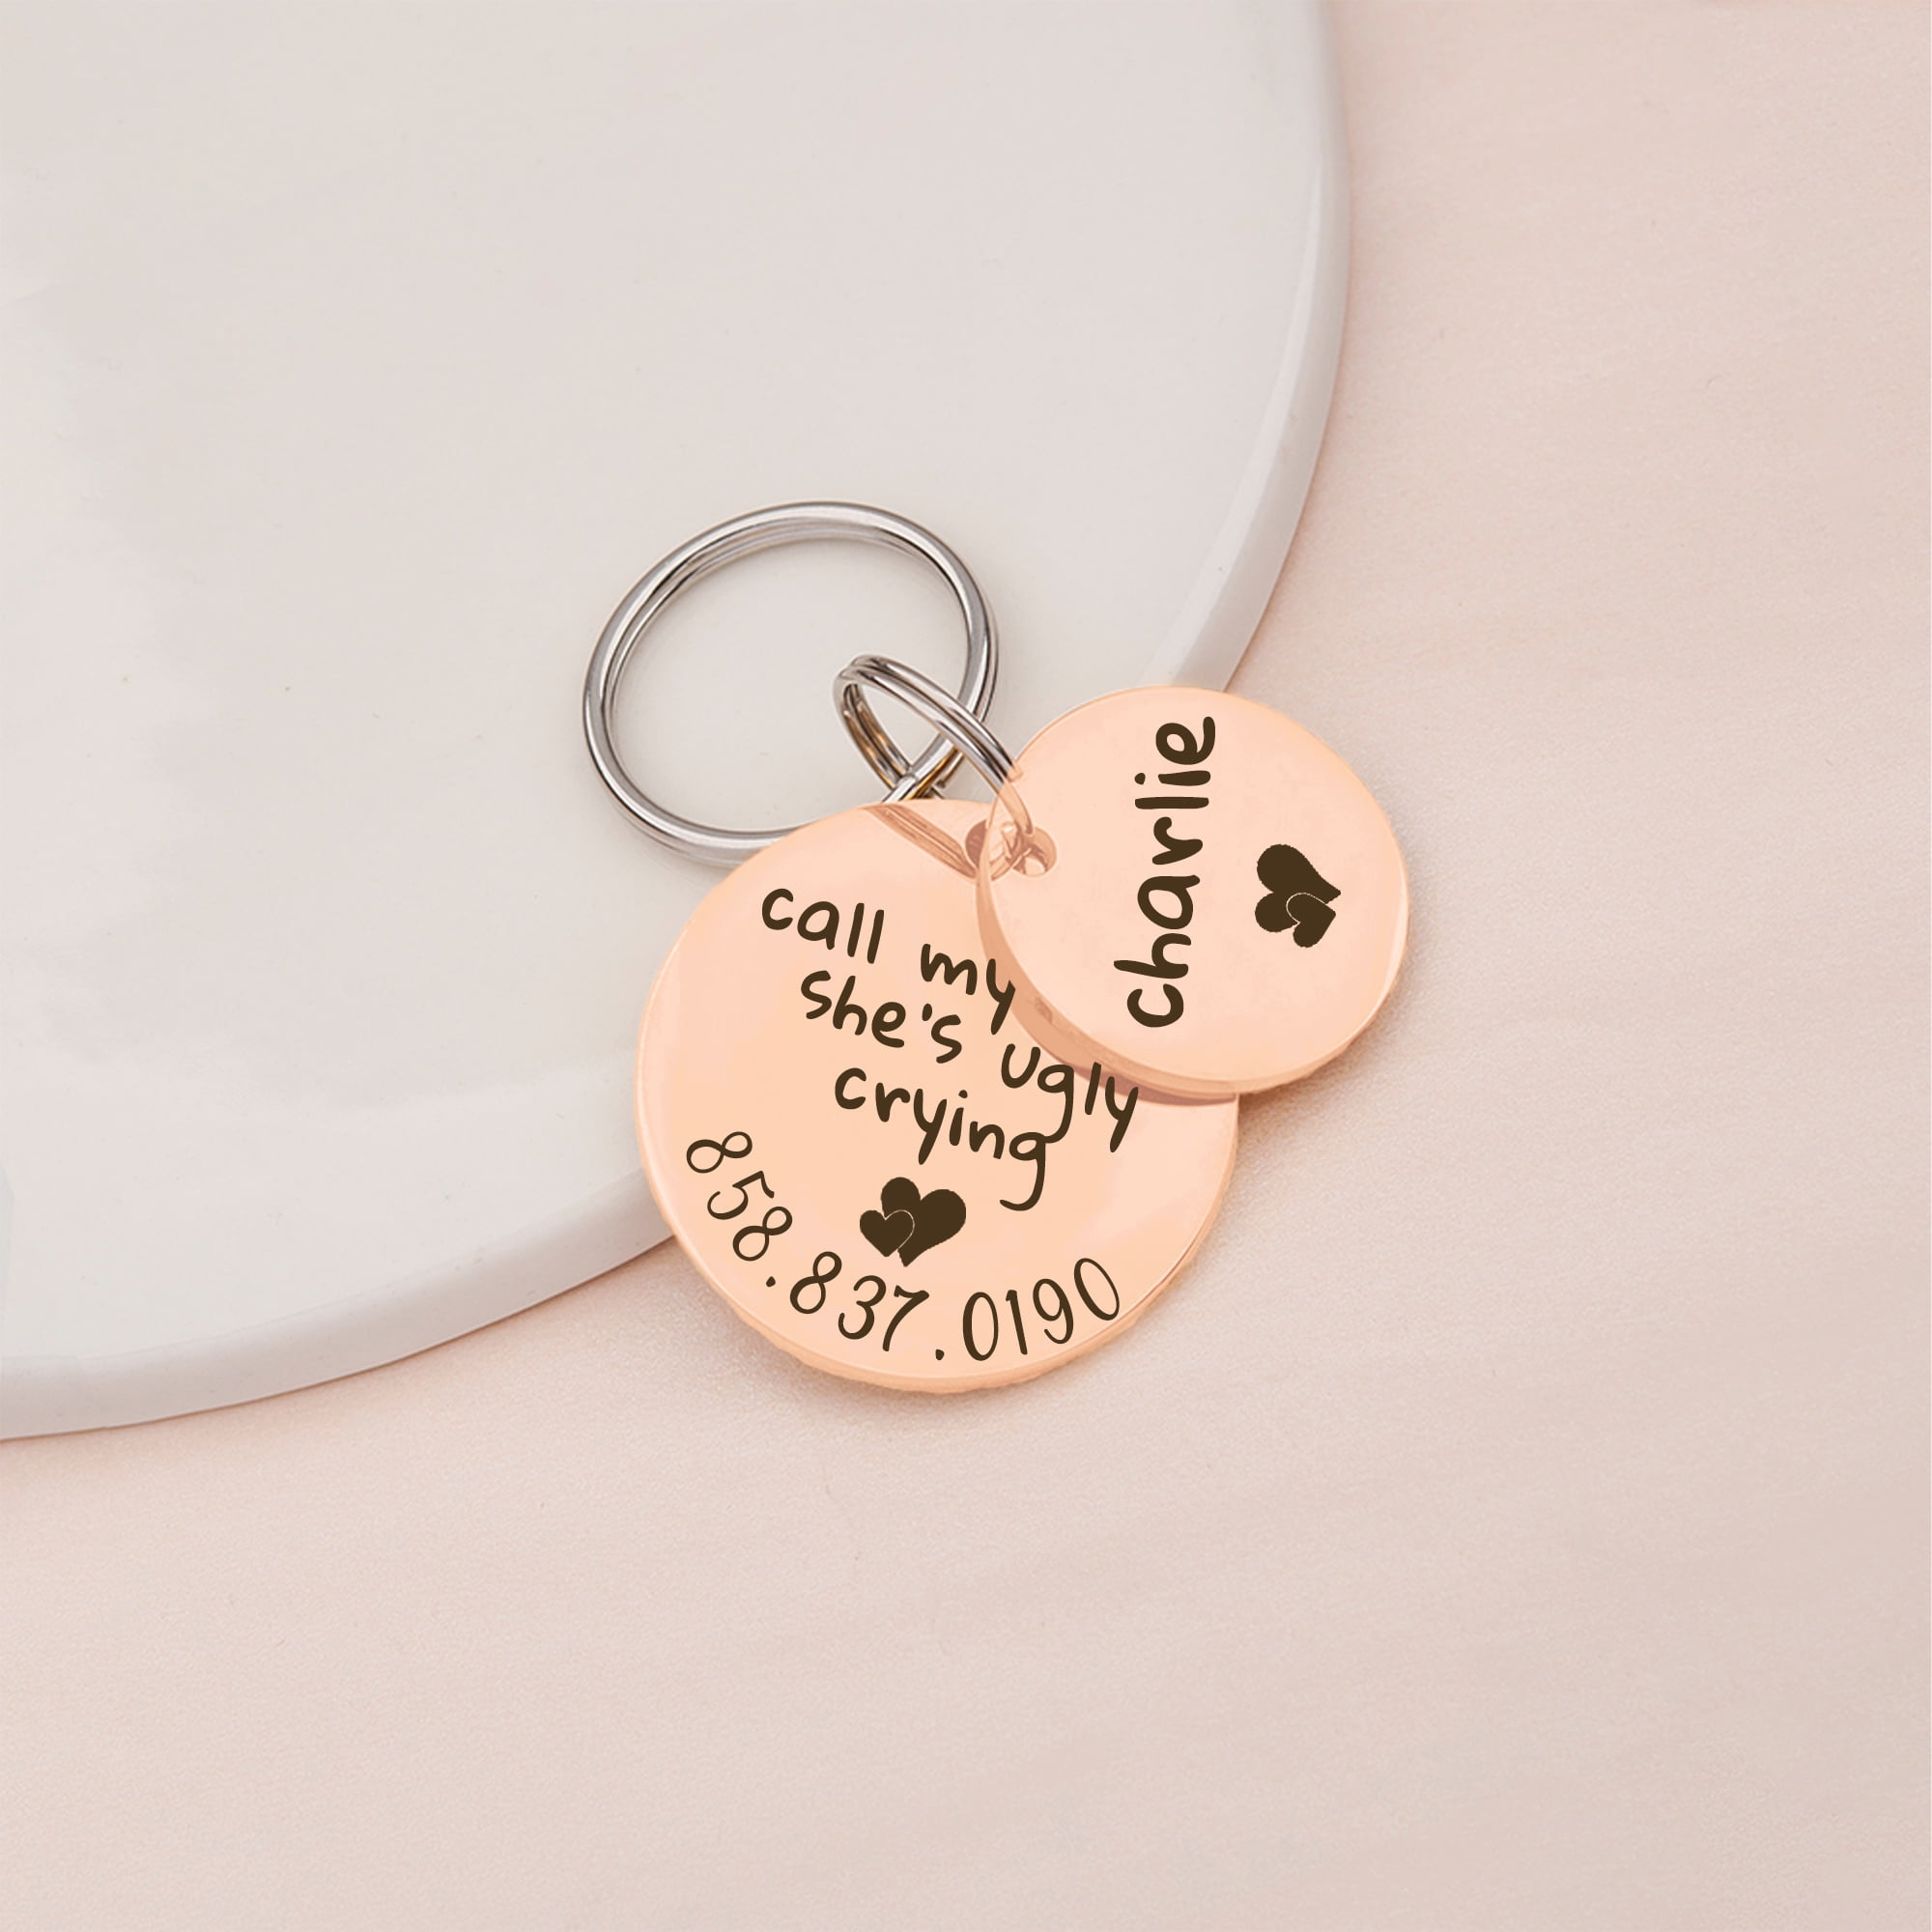 Funny Pet Tags  Custom Dog Tags for Dogs